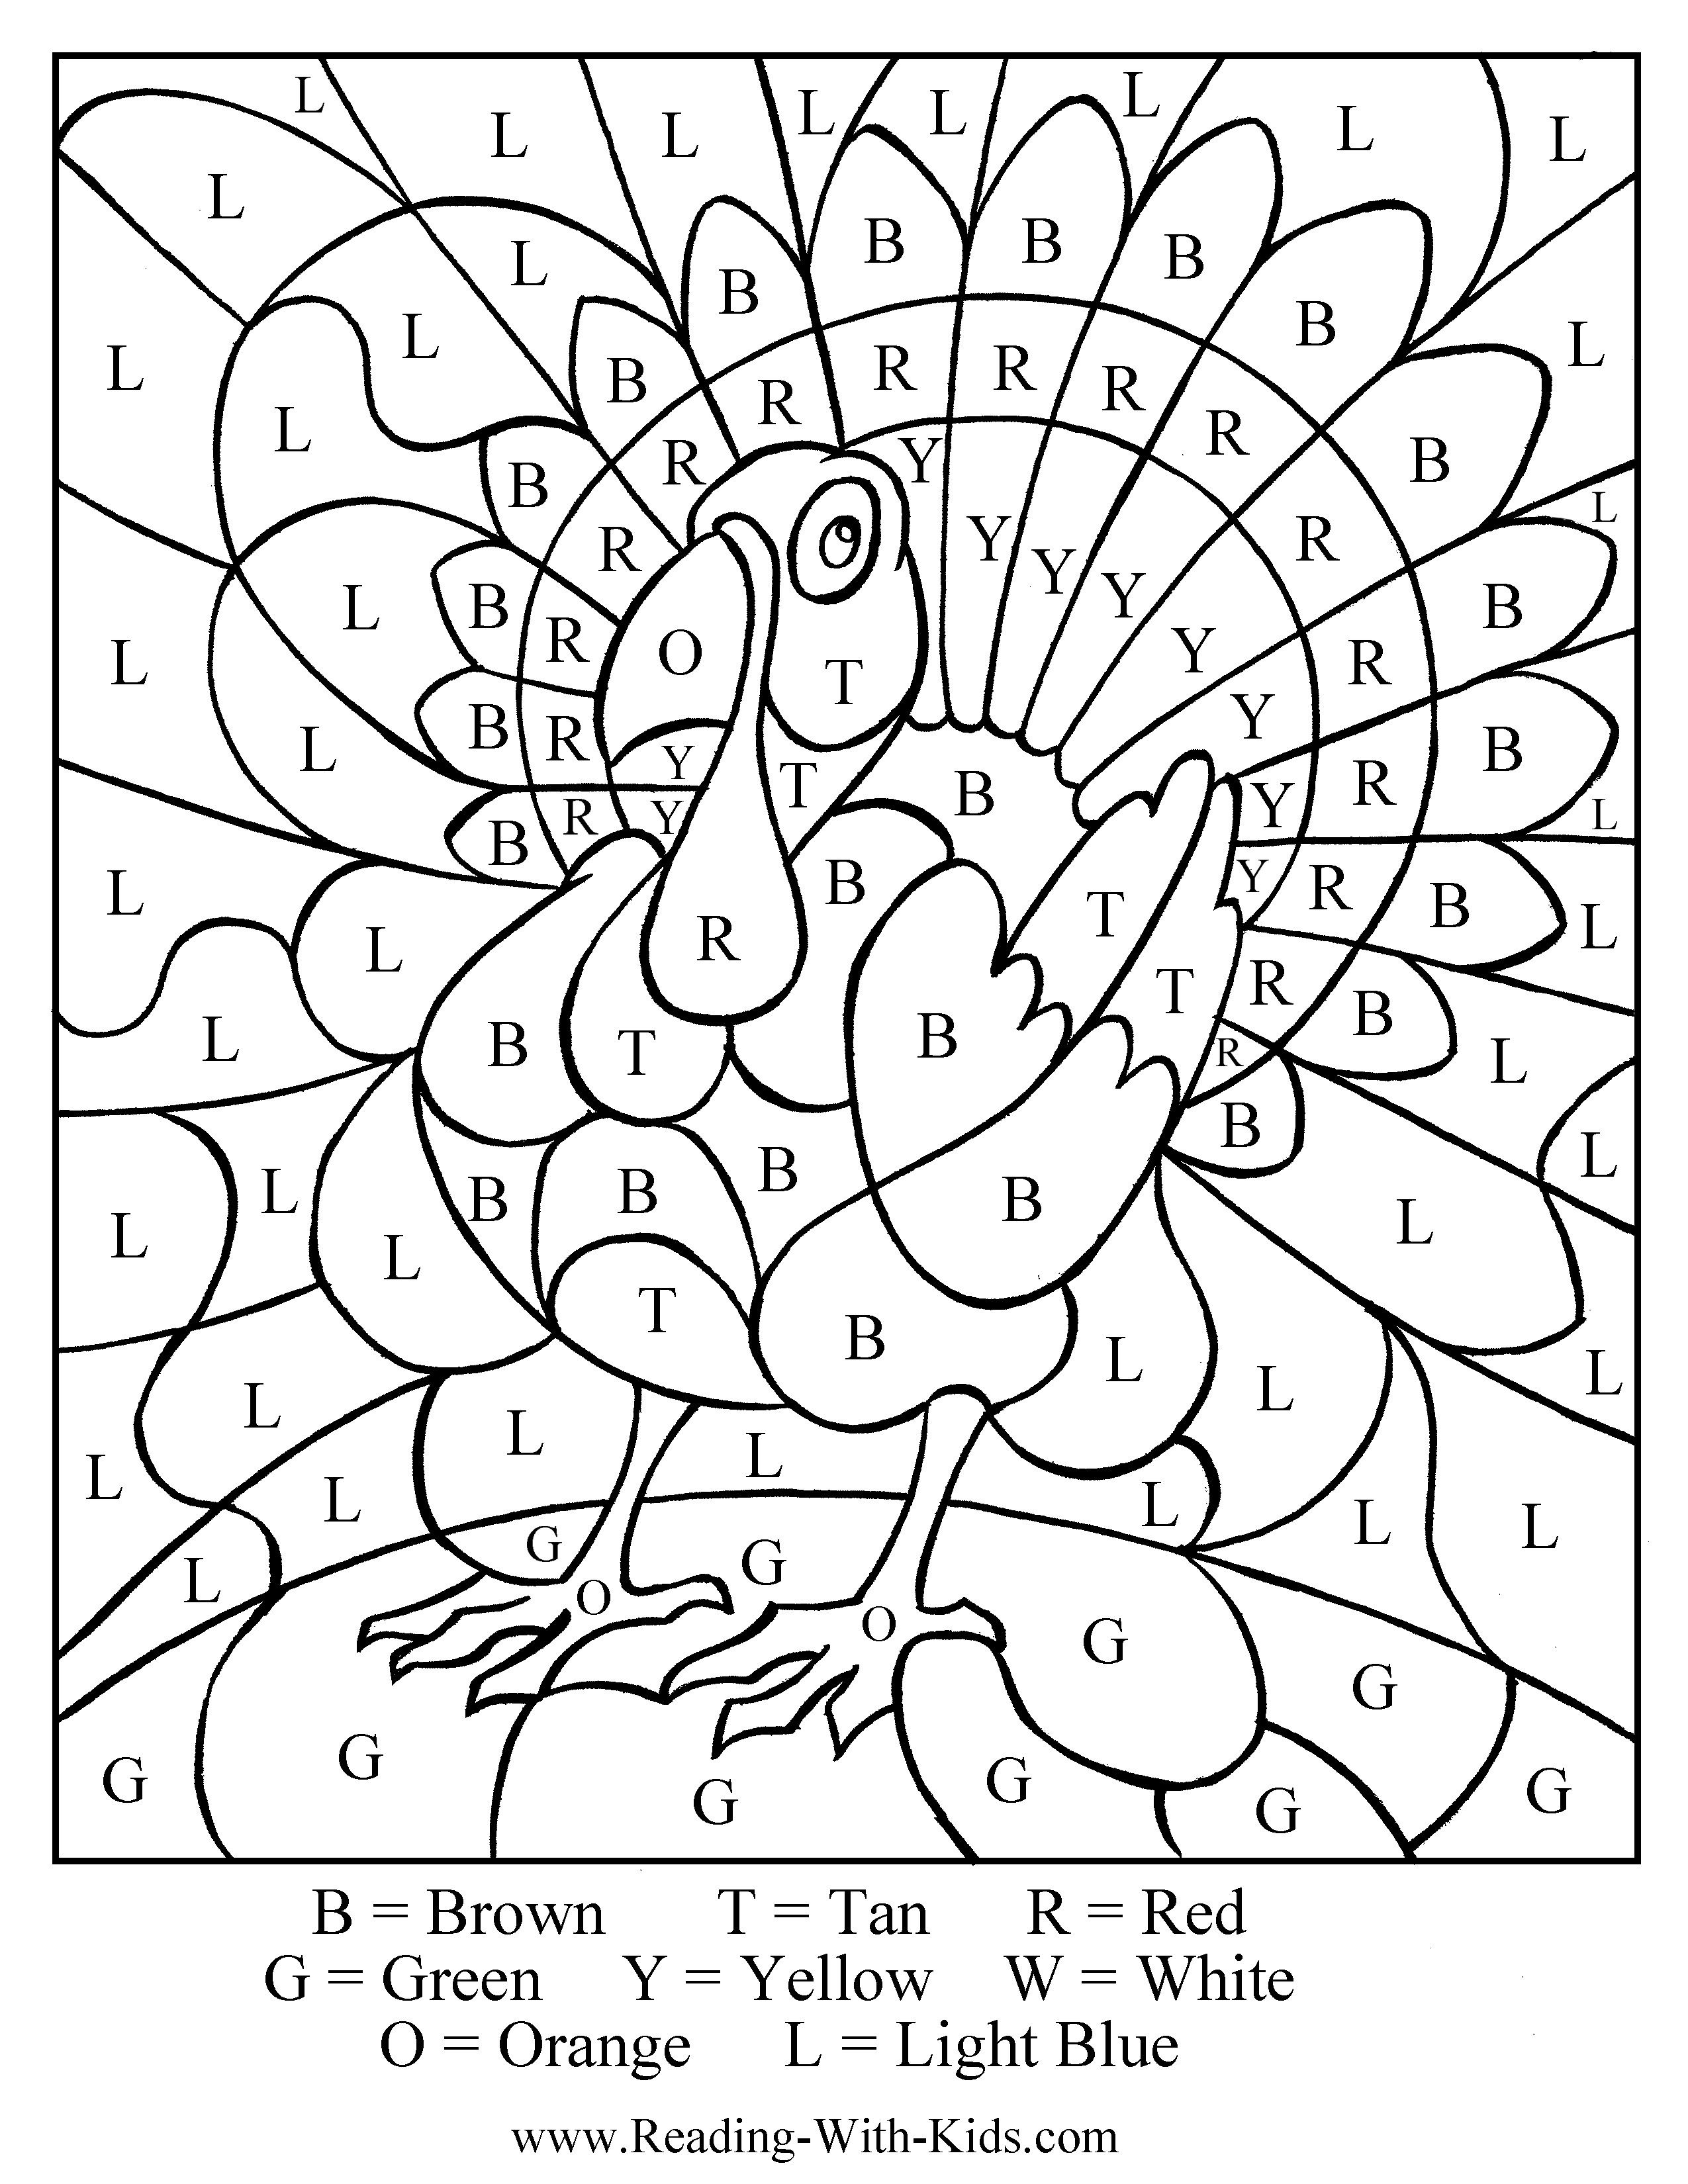 Colorletter Turkey - Great Idea For Thanksgiving #thanksgiving - Free Thanksgiving Mini Book Printable